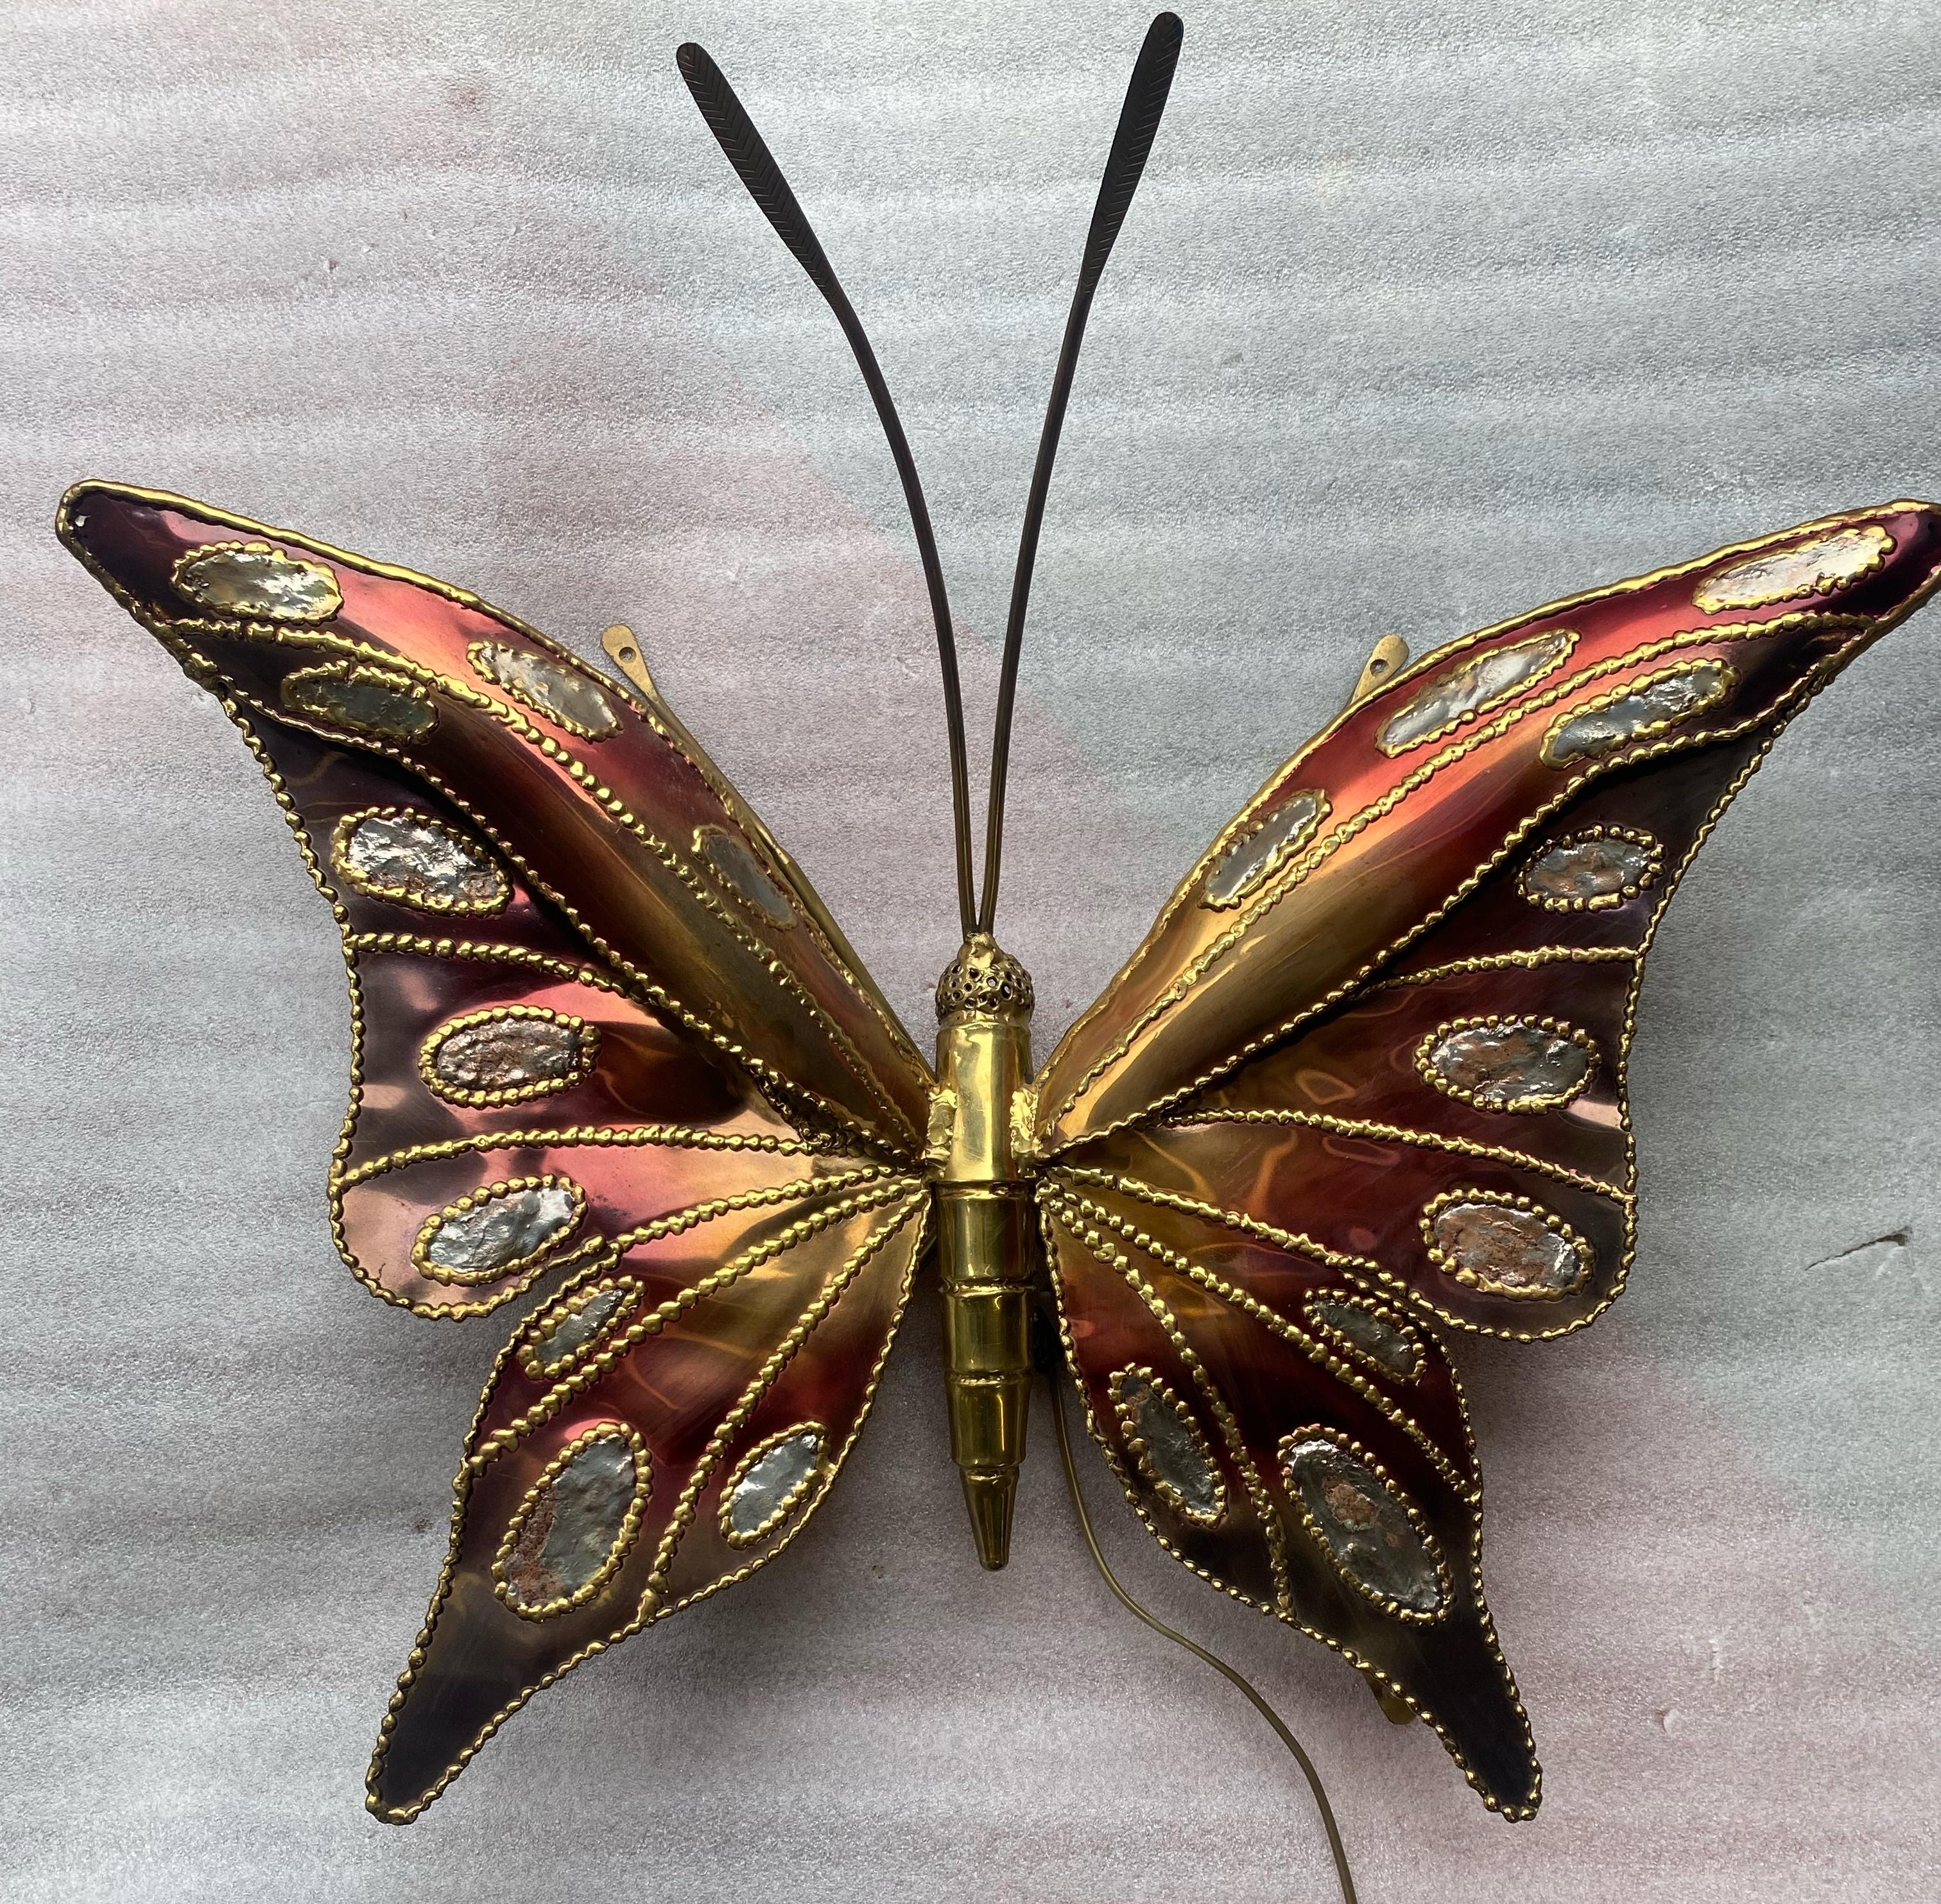 1970' Wall Lamp Or Ceiling Butterfly Enlightening Style Duval Brasseur or Isabelle Faure For Honoré de Paris, Wingspan 71 cm
Wall or ceiling light in patinated bronze and brass
4 E14 screw bulbs
condition of use
creation circa 1970
Height: